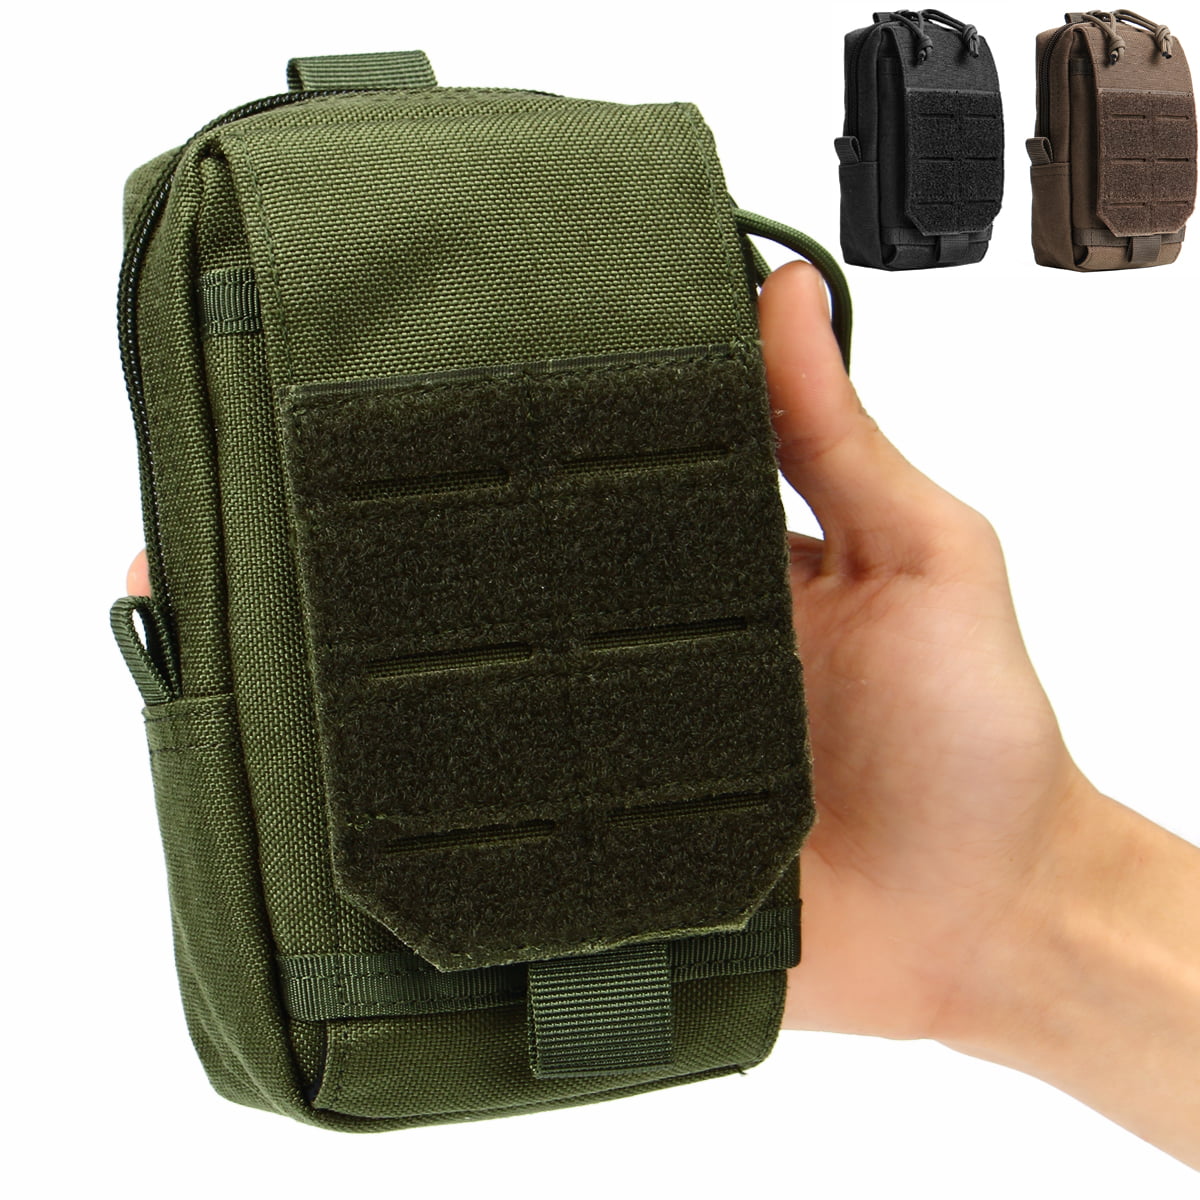 Tactical Molle Pouch Belt Waist Fanny Pack Phone Bag Utility Pocket Hiking Camp 